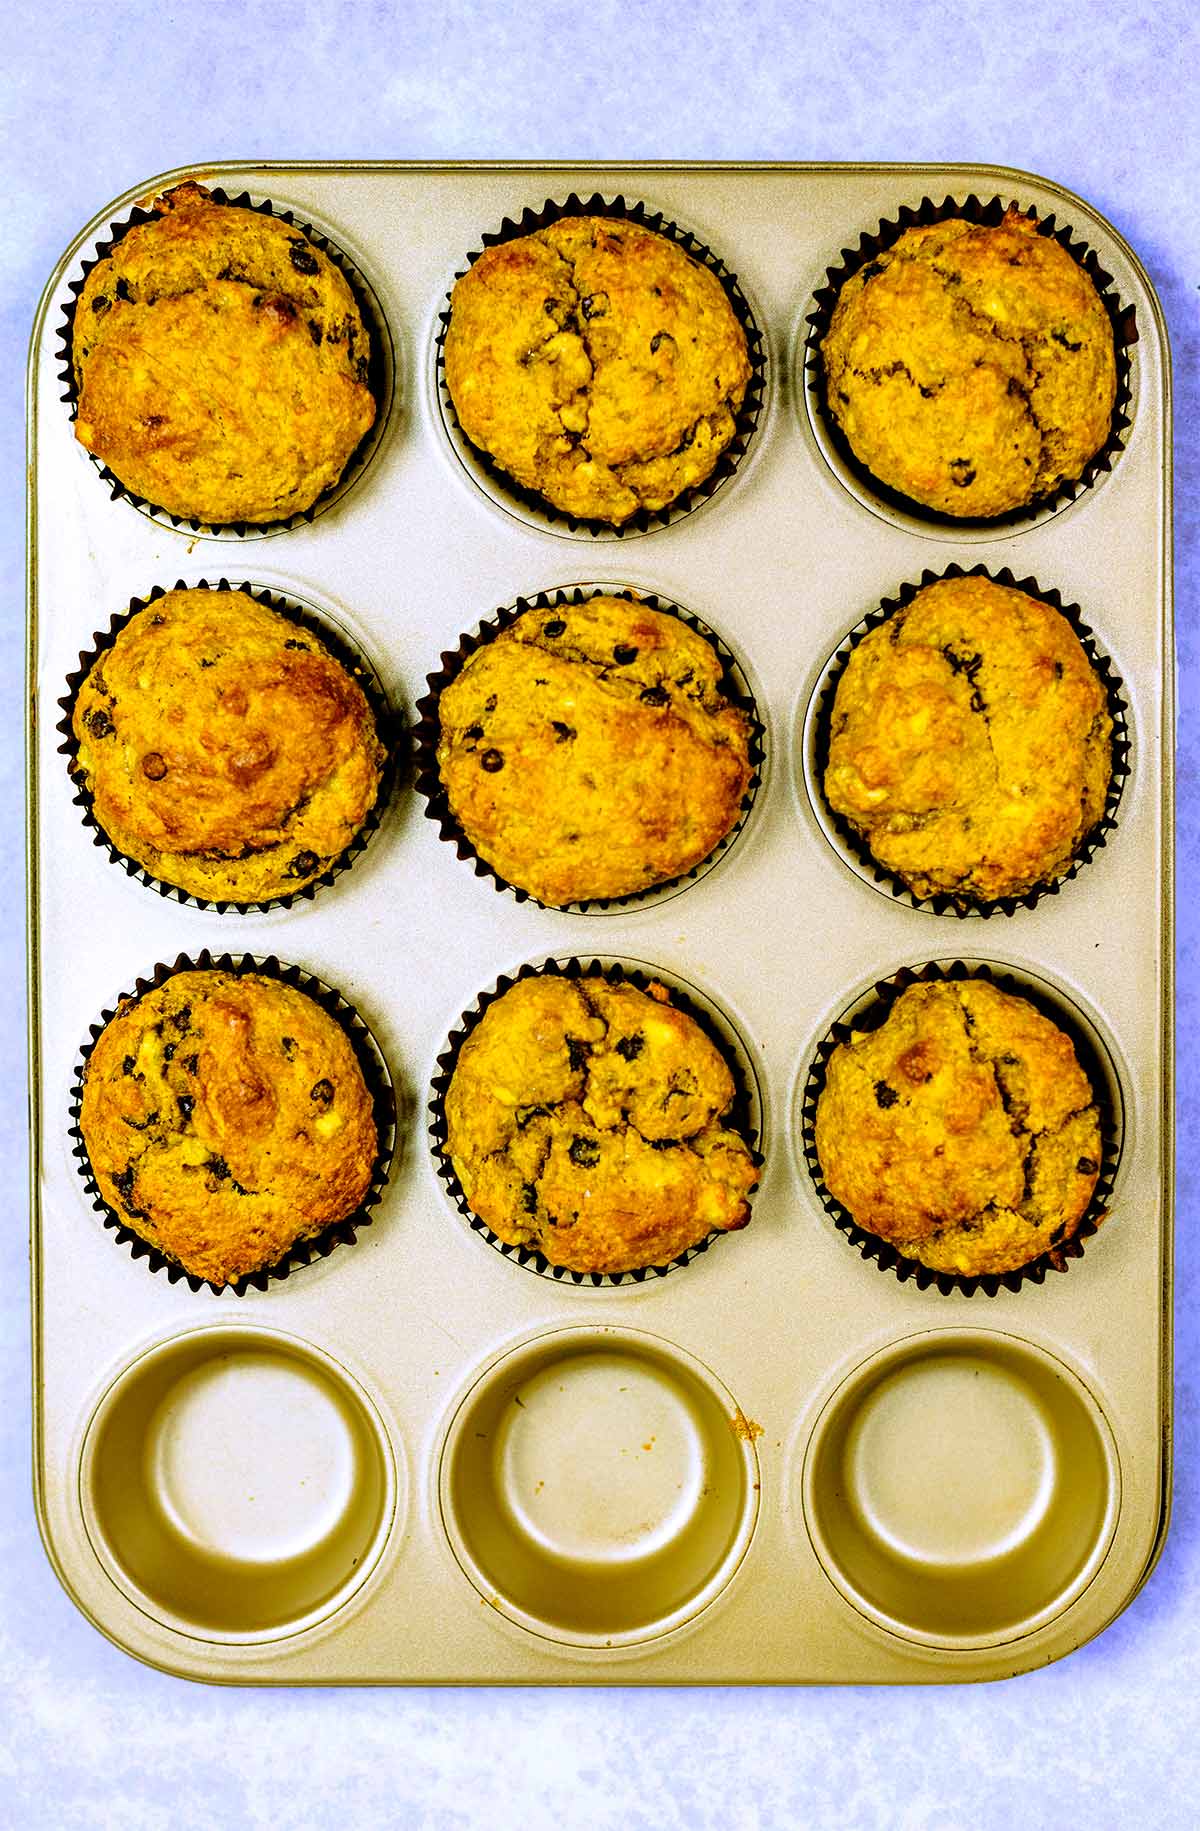 Nine cooked banana muffins in a muffin tin.